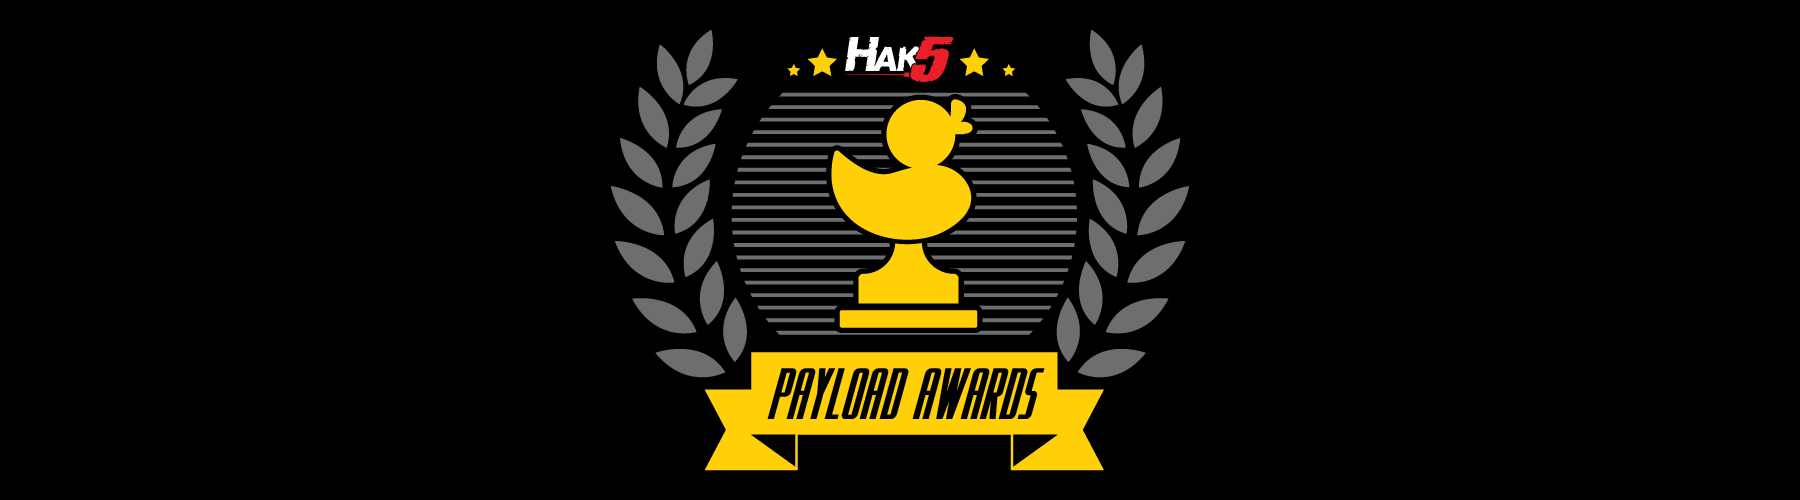 Payload Awards